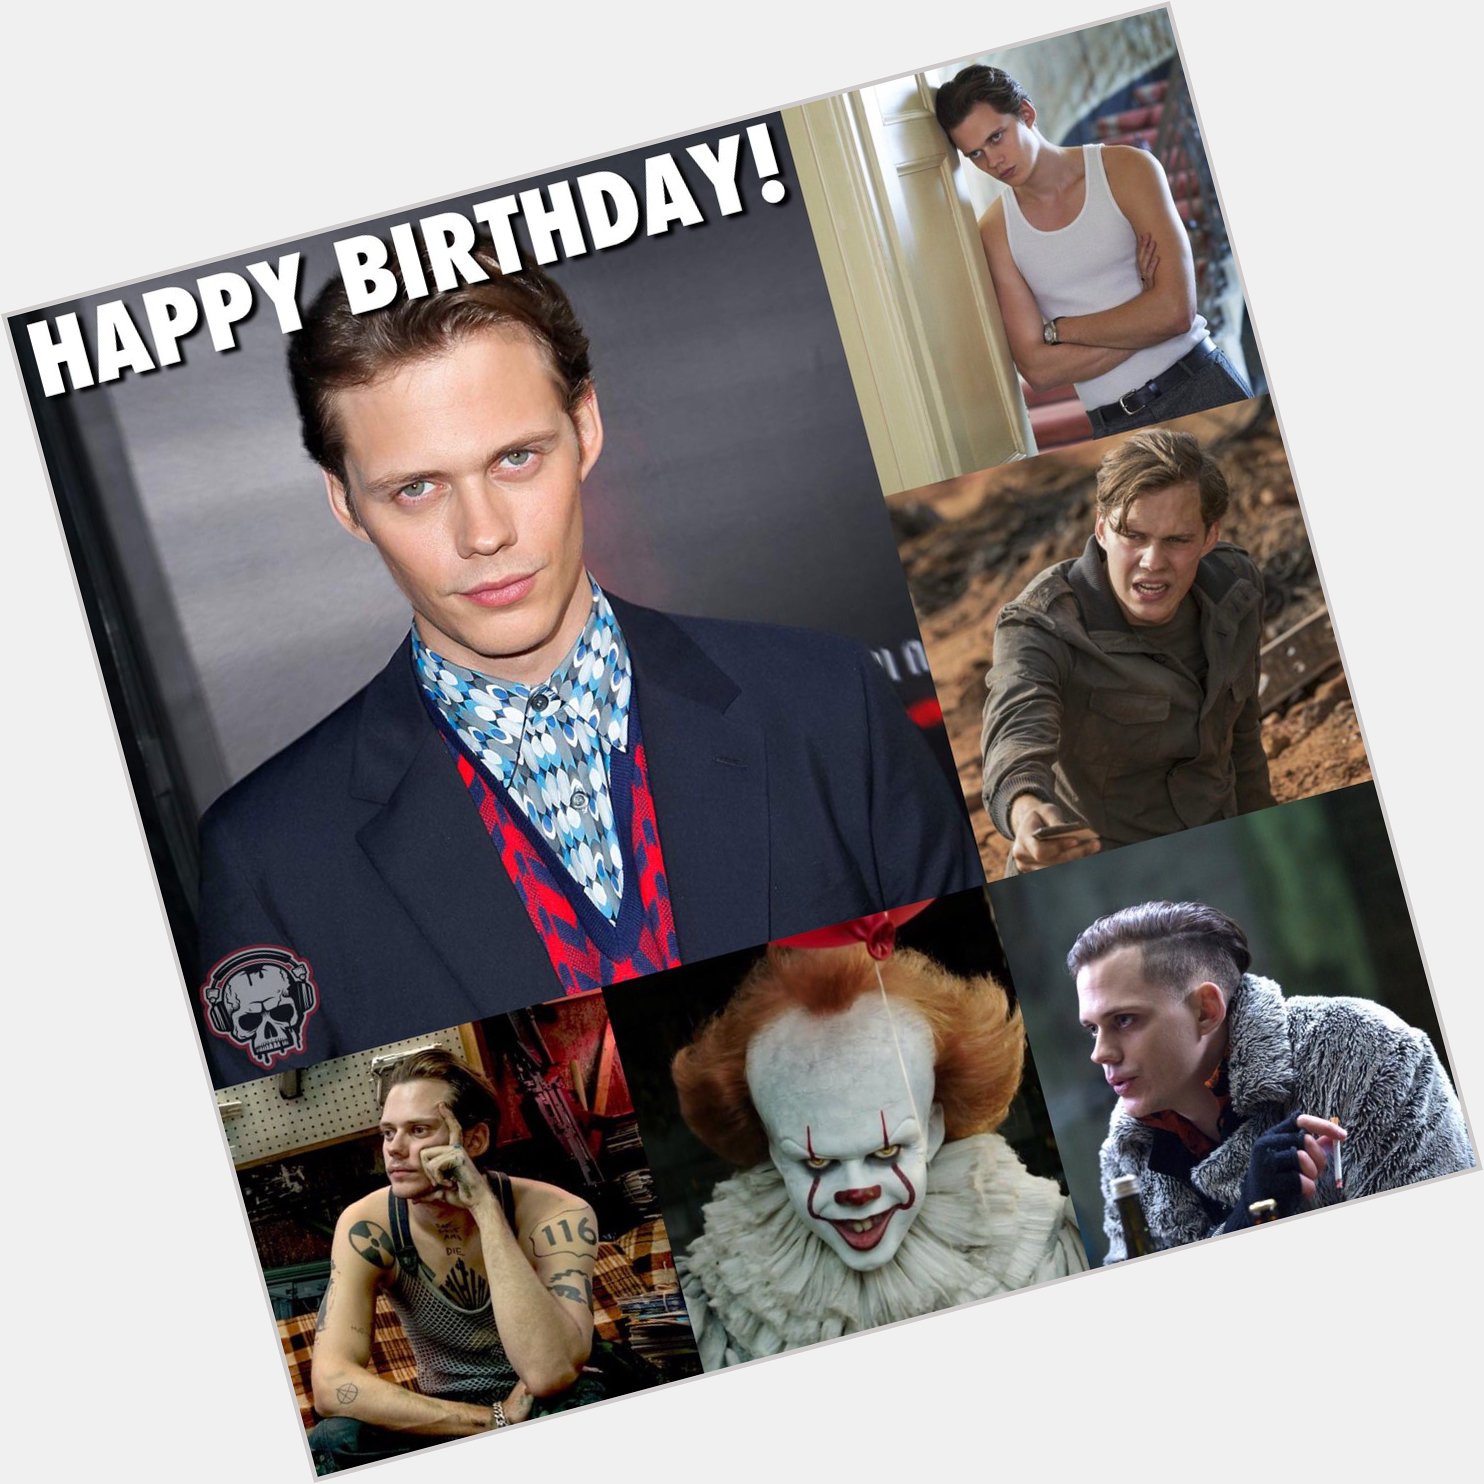 Totally forgot to post this today! Happy birthday to Bill Skarsgard! He s not even 30 yet! Isn t that crazy?! 